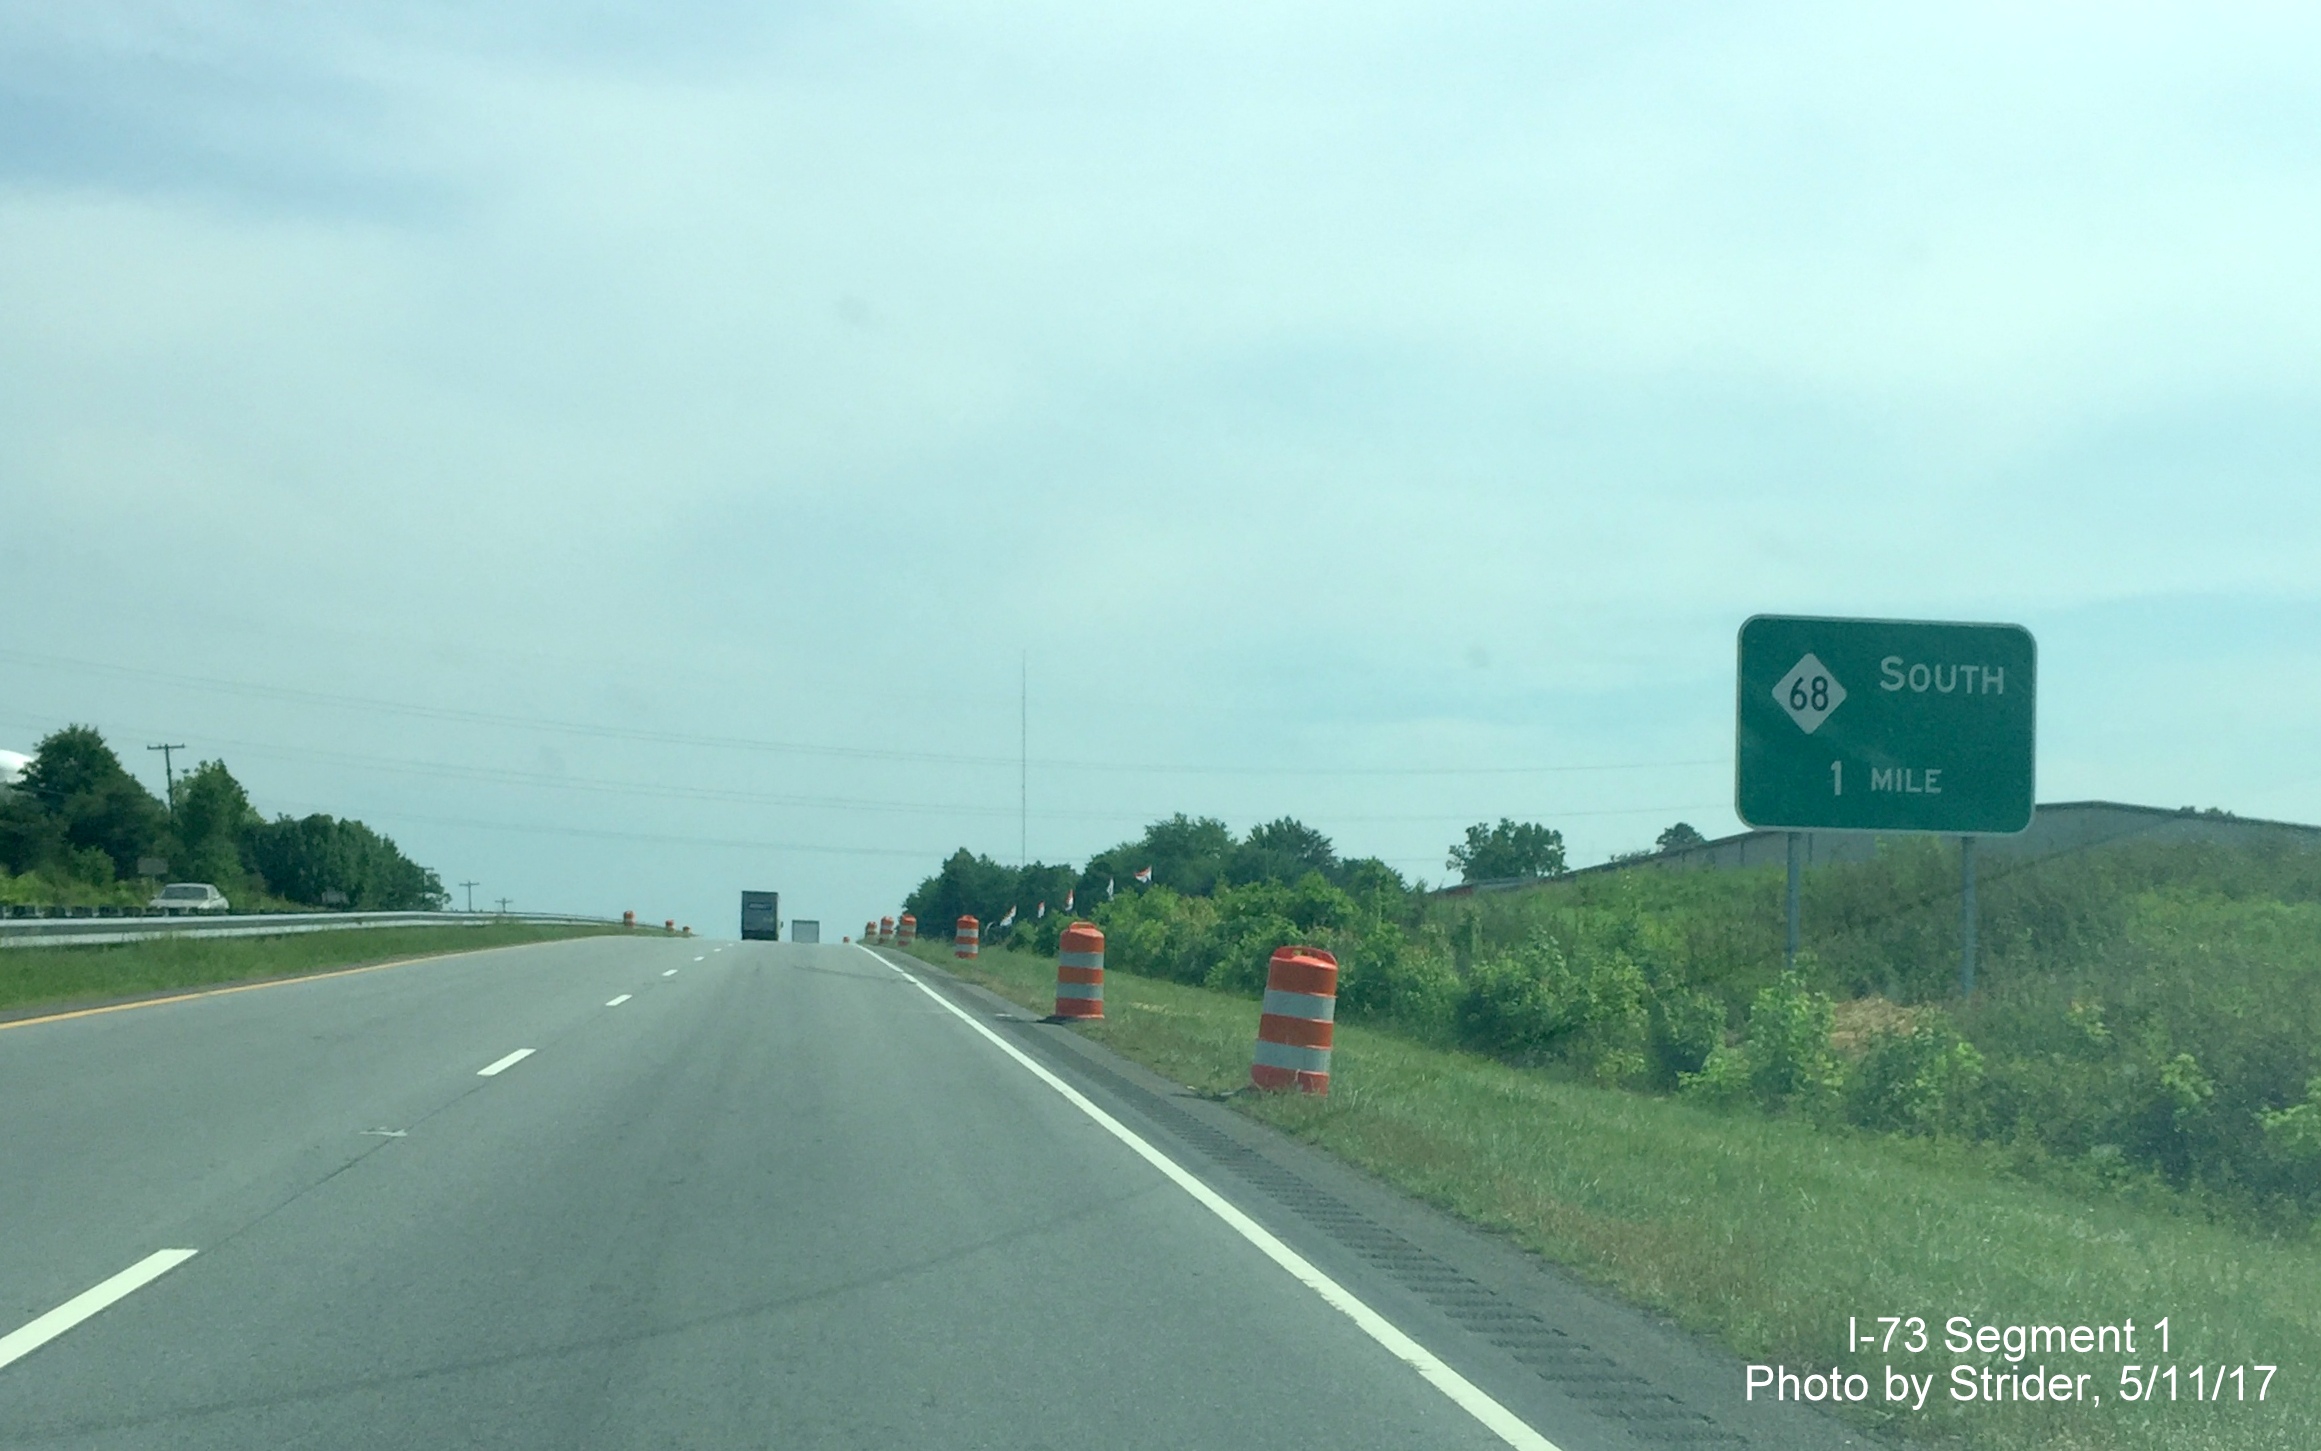 Image of newly placed 1-Mile Exit sign for new NC 68 interchange on US 220 South in Rockingham County, by Strider